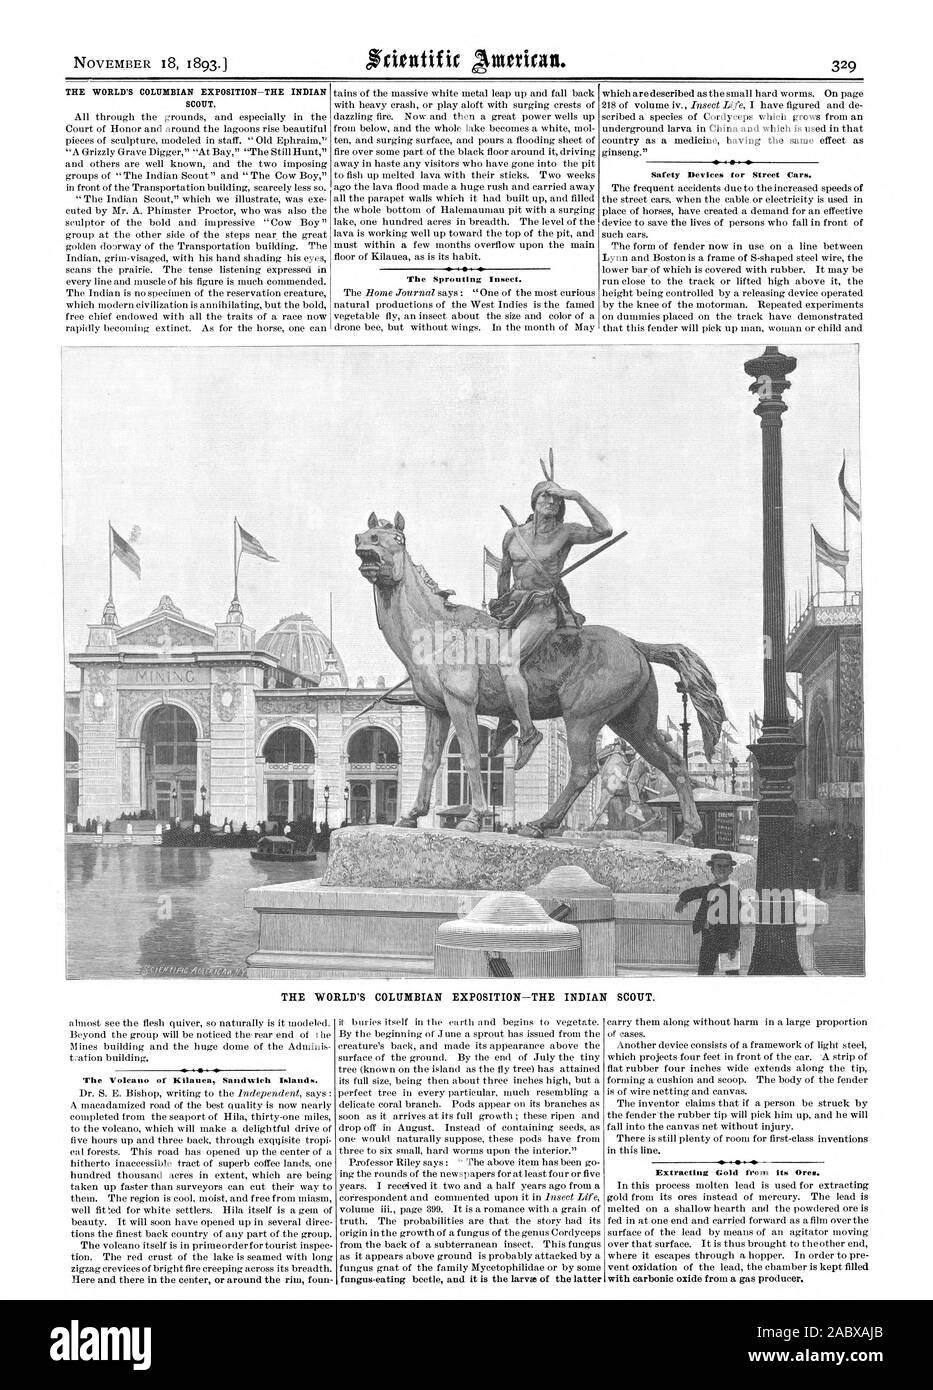 THE WORLD'S COLUMBIAN EXPOSITION—THE INDIAN SCOUT. The Sprouting Insect. Safety Devices for Street Cars. THE WORLD'S COLUMBIAN EXPOSITION—THE INDIAN SCOUT. The Volcano of Kilauea Sandwich Islands. Extracting Gold from its Ores., scientific american, 1893-11-18 Stock Photo